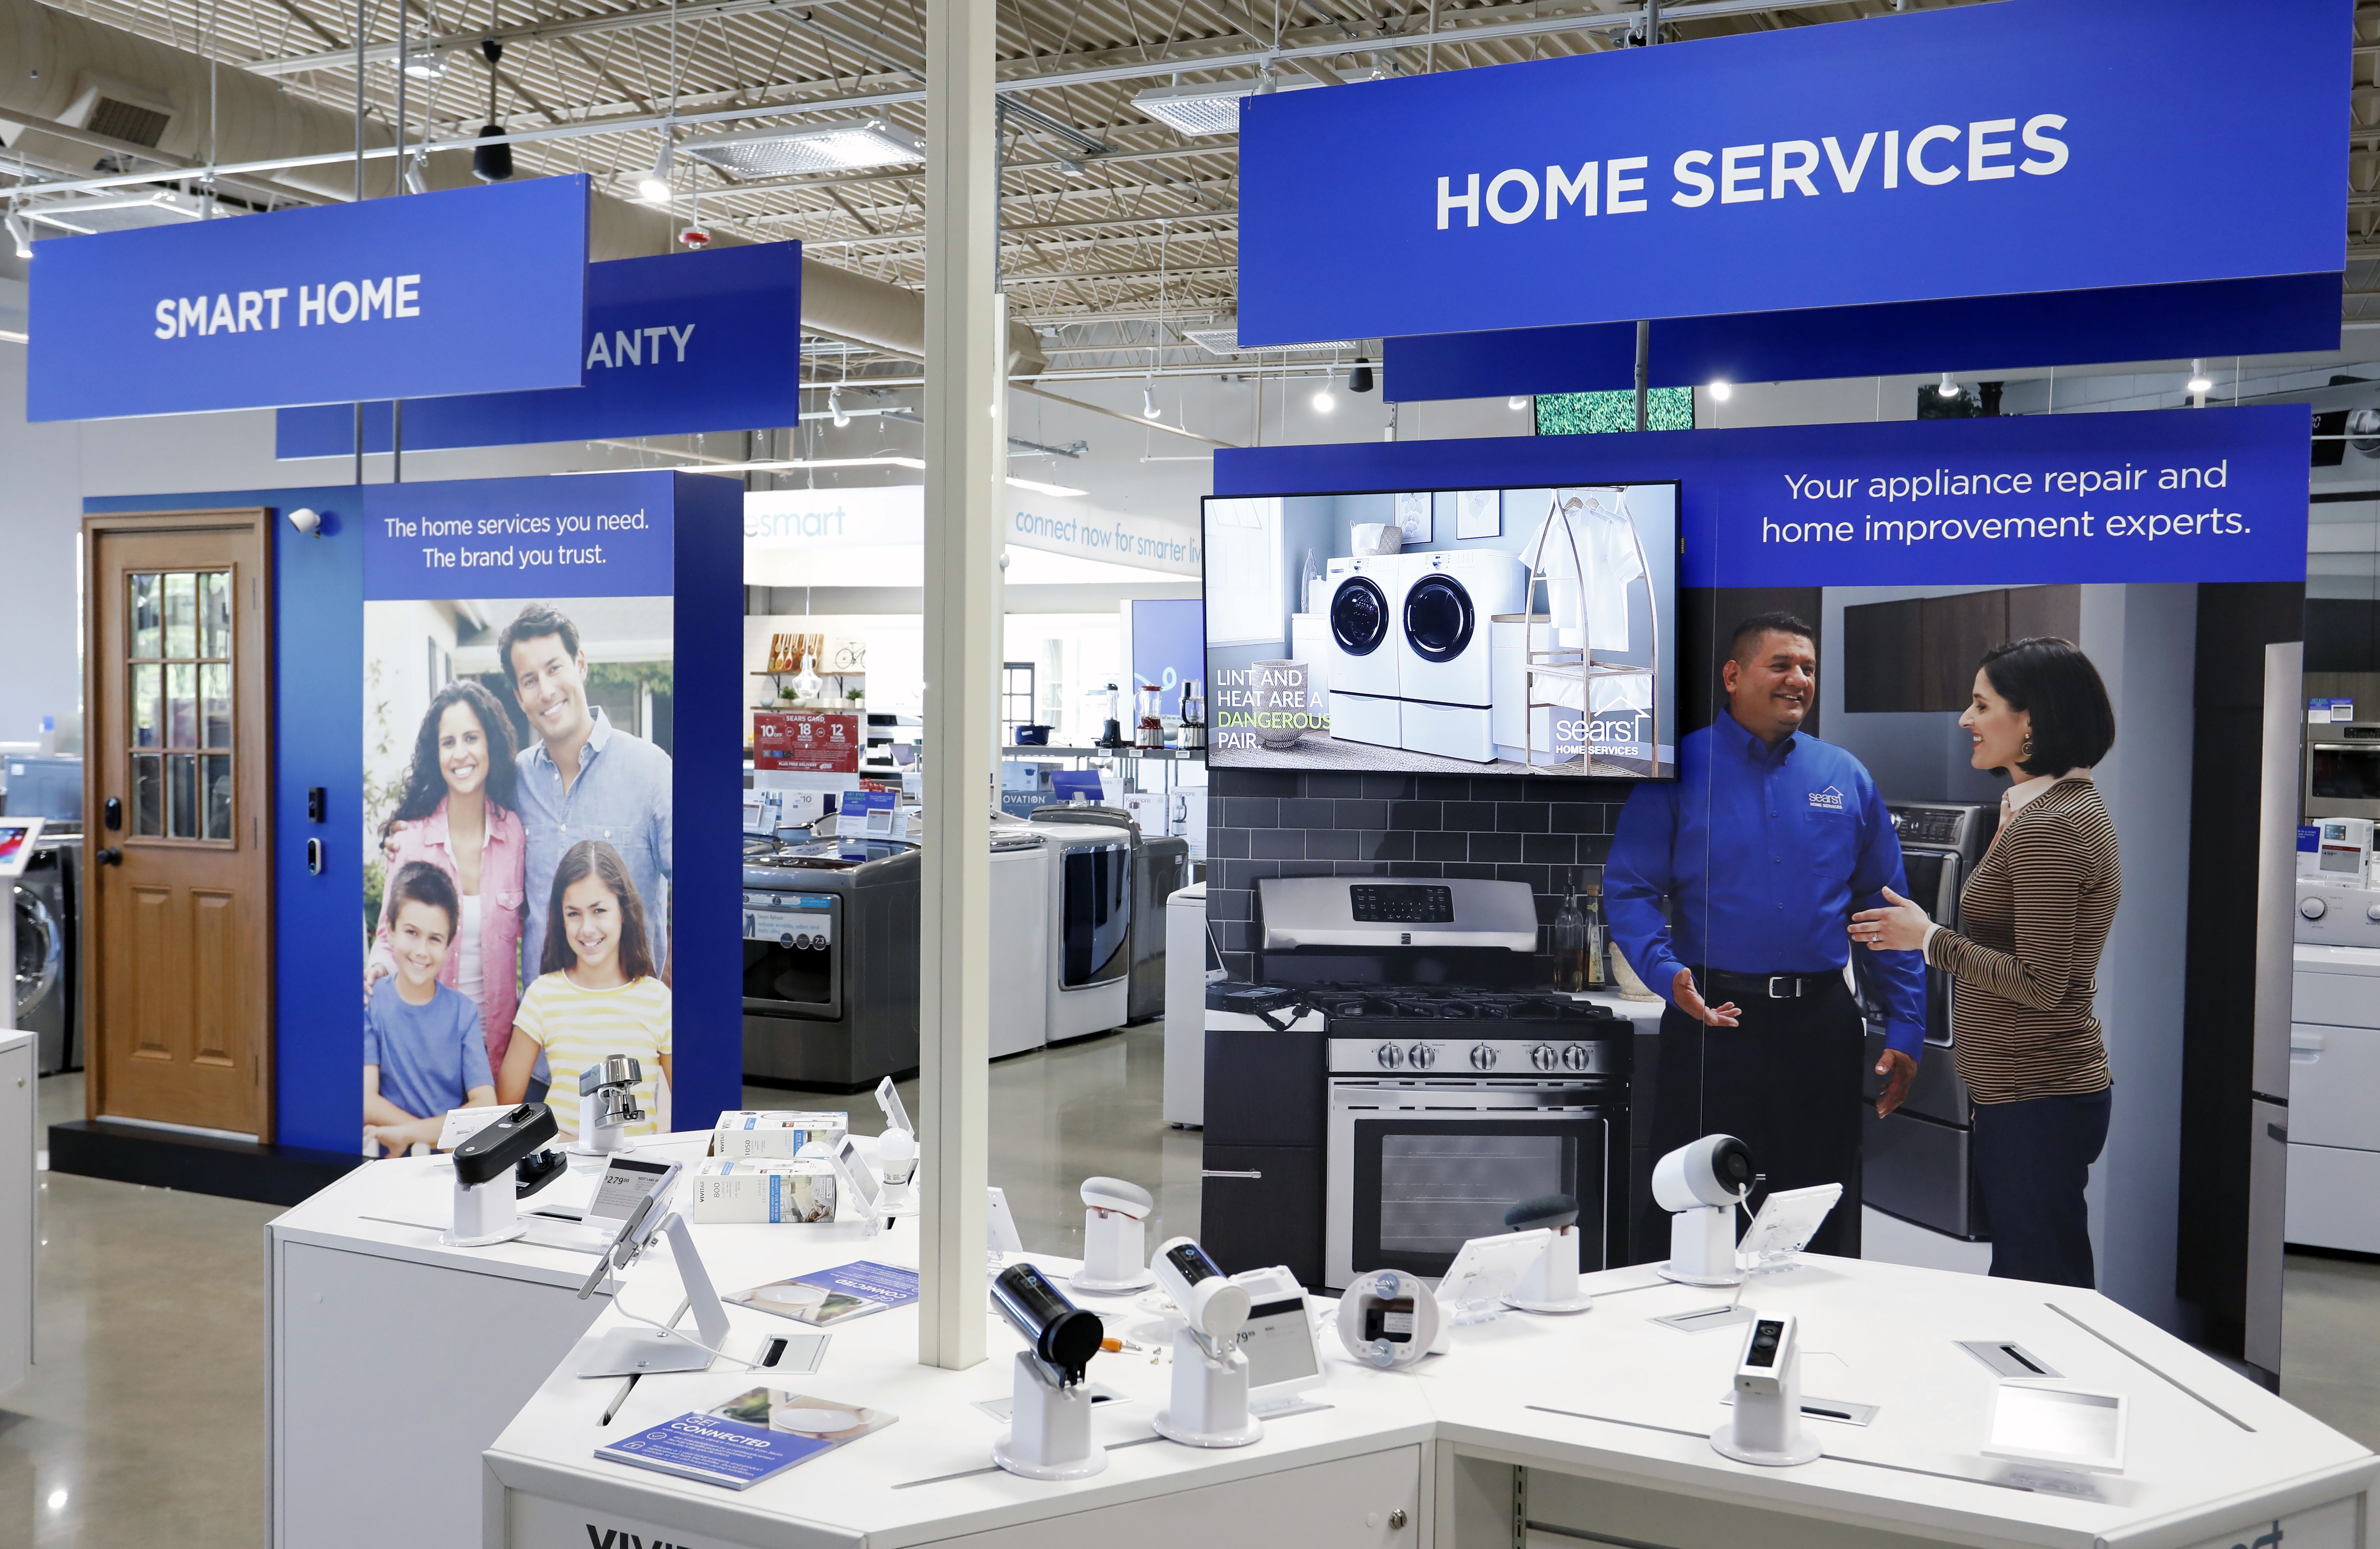 Sears just opened a new store, here's what it looks like